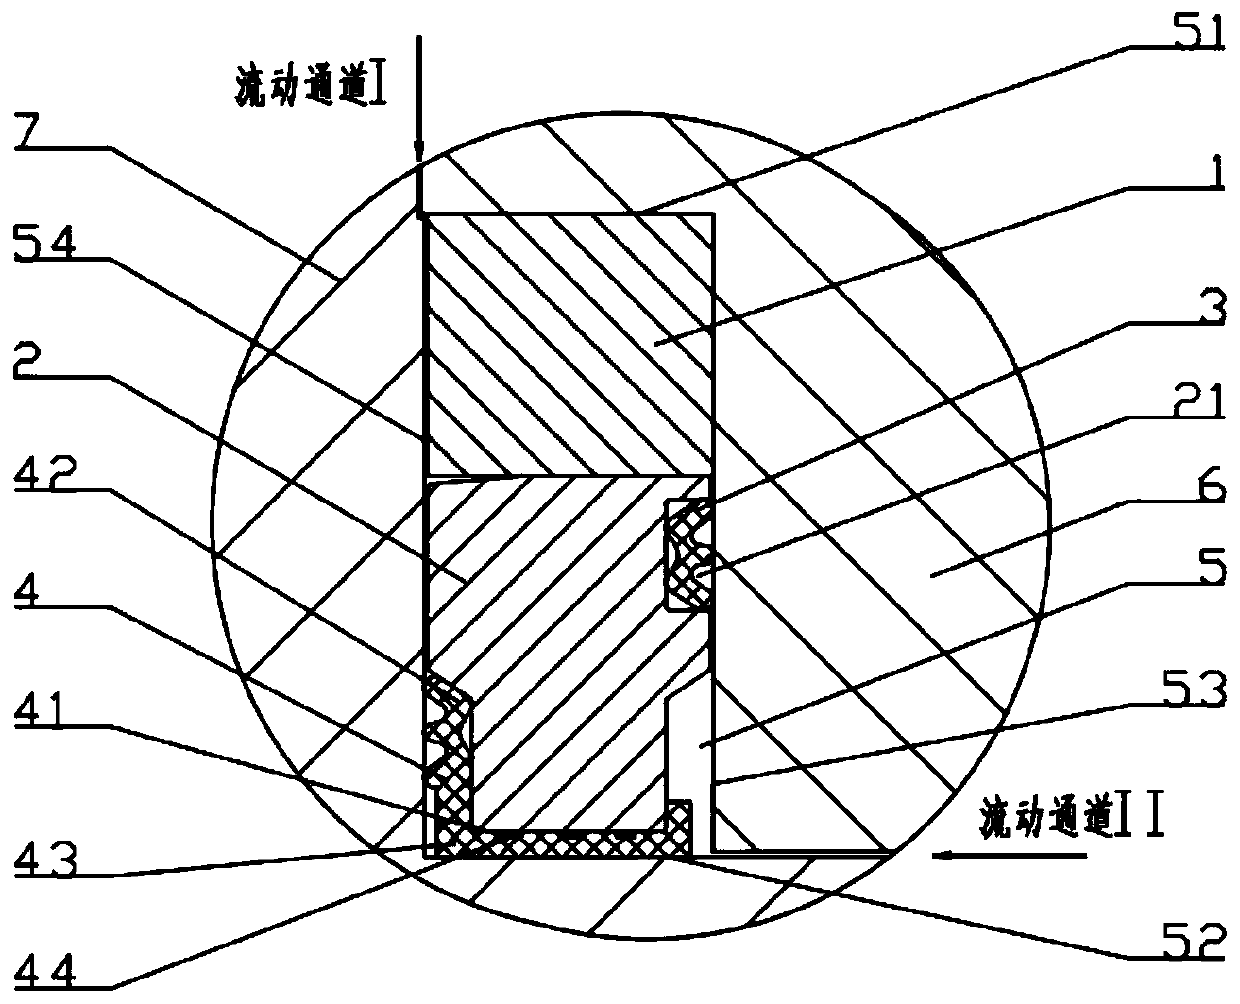 Dual-W-shaped combined type metal sealing structure for roller cone bit